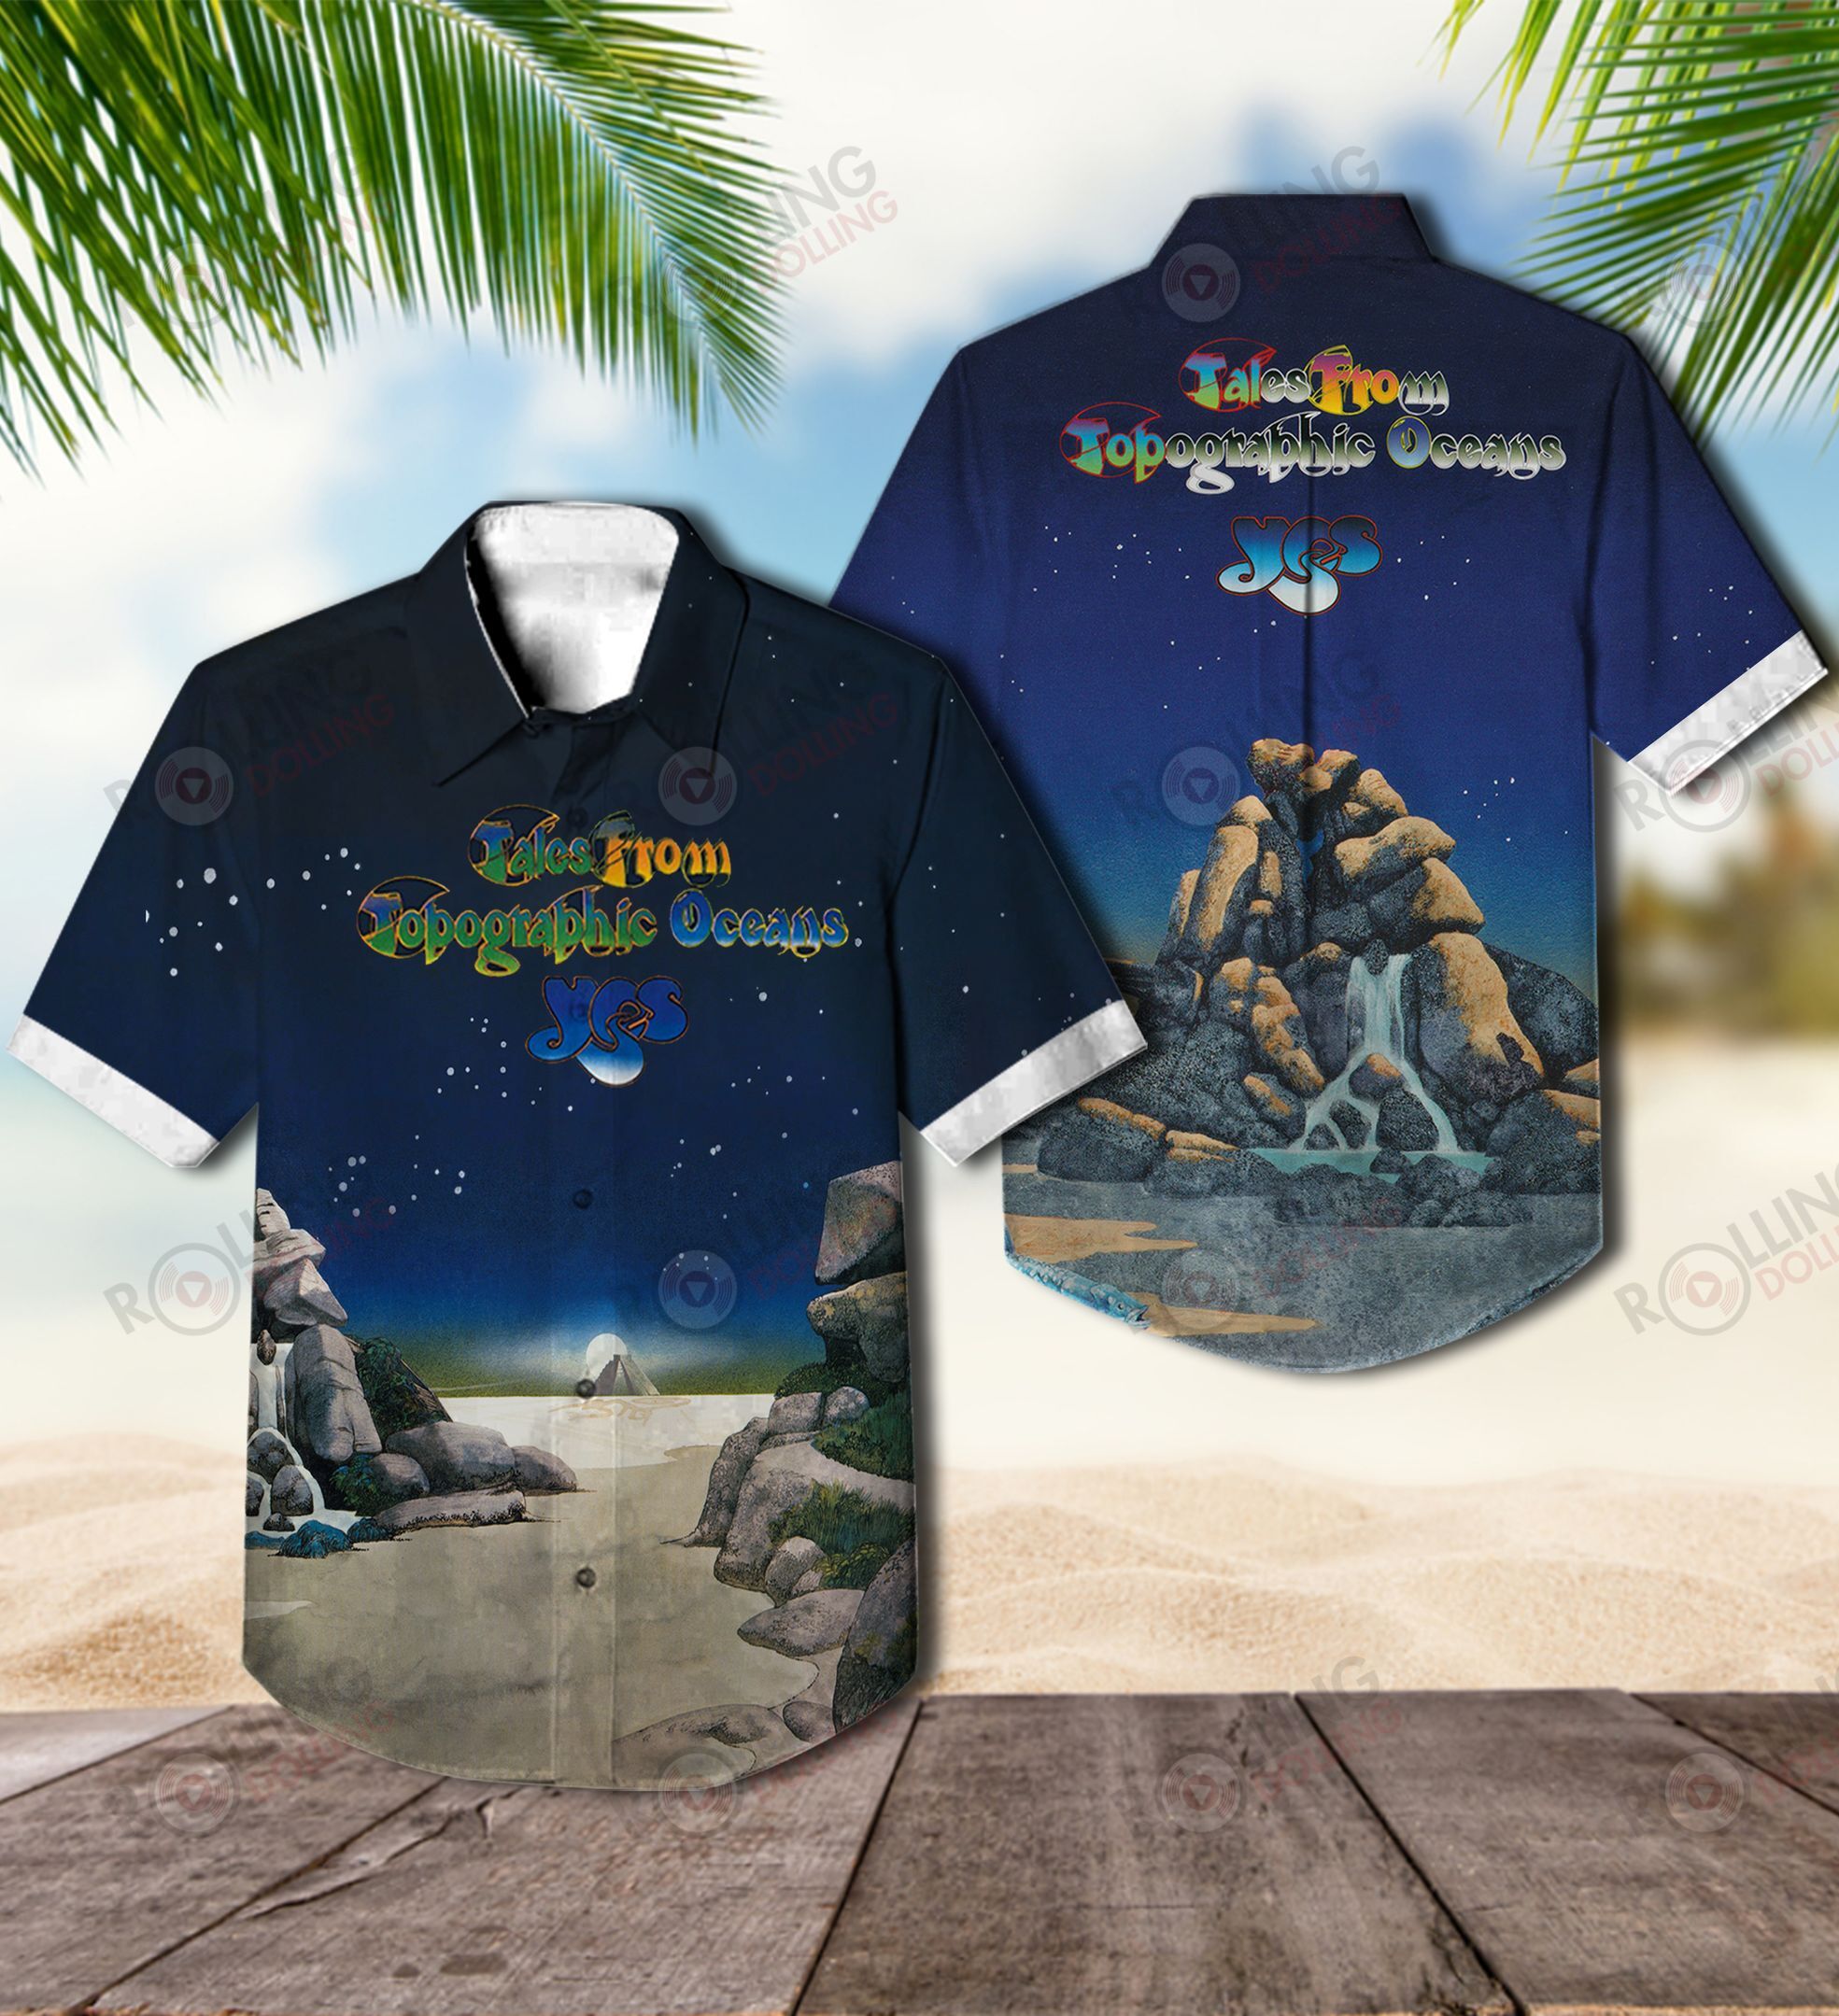 For summer, consider wearing This Amazing Hawaiian Shirt shirt in our store 175